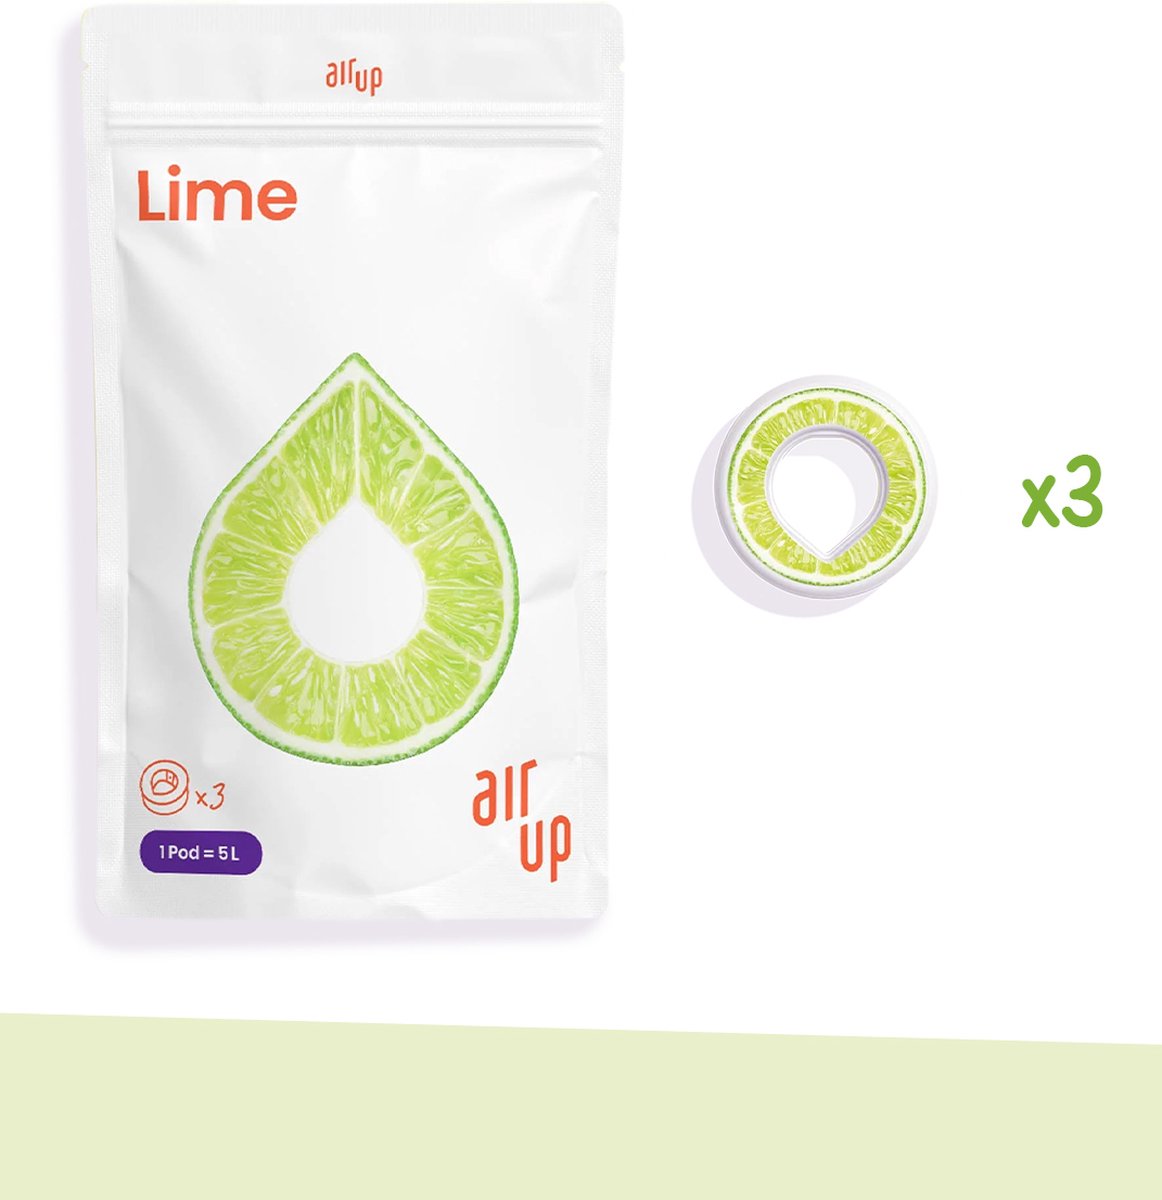 Air Up Lime Pods - Inclusief 3 pods - 23 refills - navulling - hydraterend - Air up - geurwater - vegan - bio